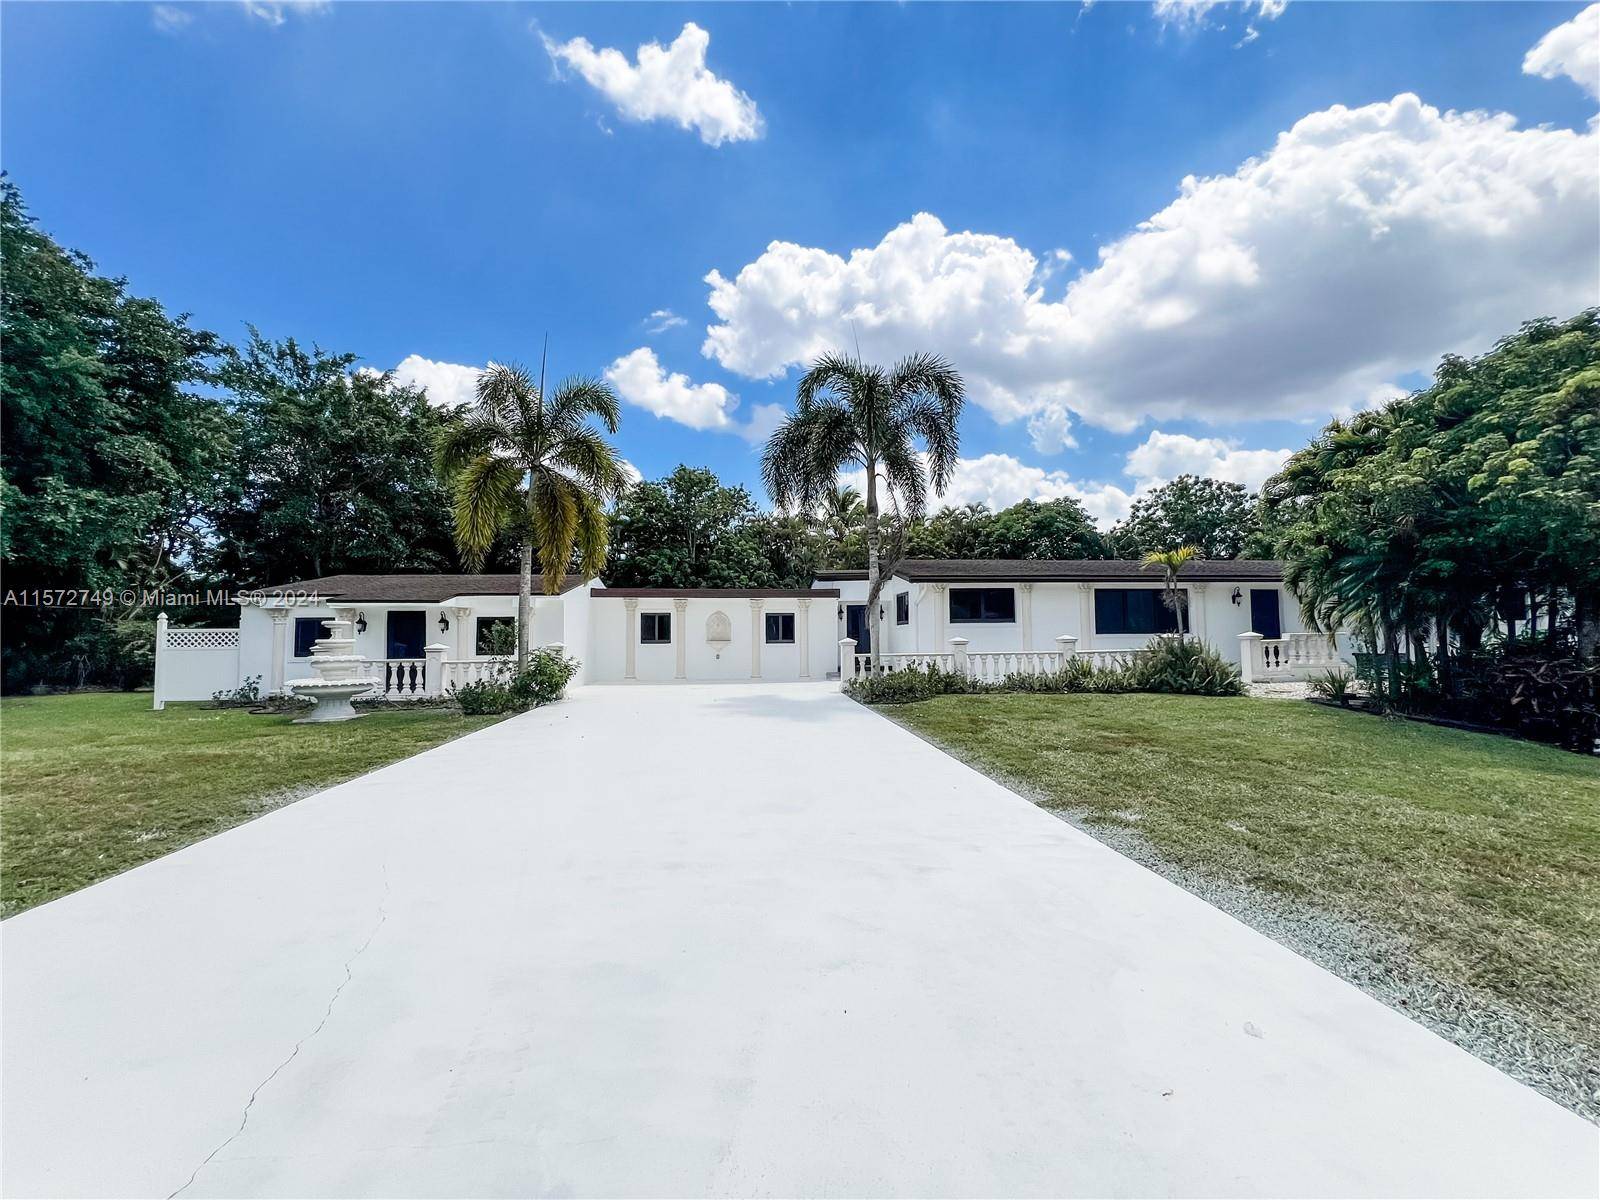 Welcome to this beautiful 3 beds 3 baths multigenerational home nestled in the highly sought after neighborhood of Plantation Acres, this residence boasts a serene private pond with a deck ...